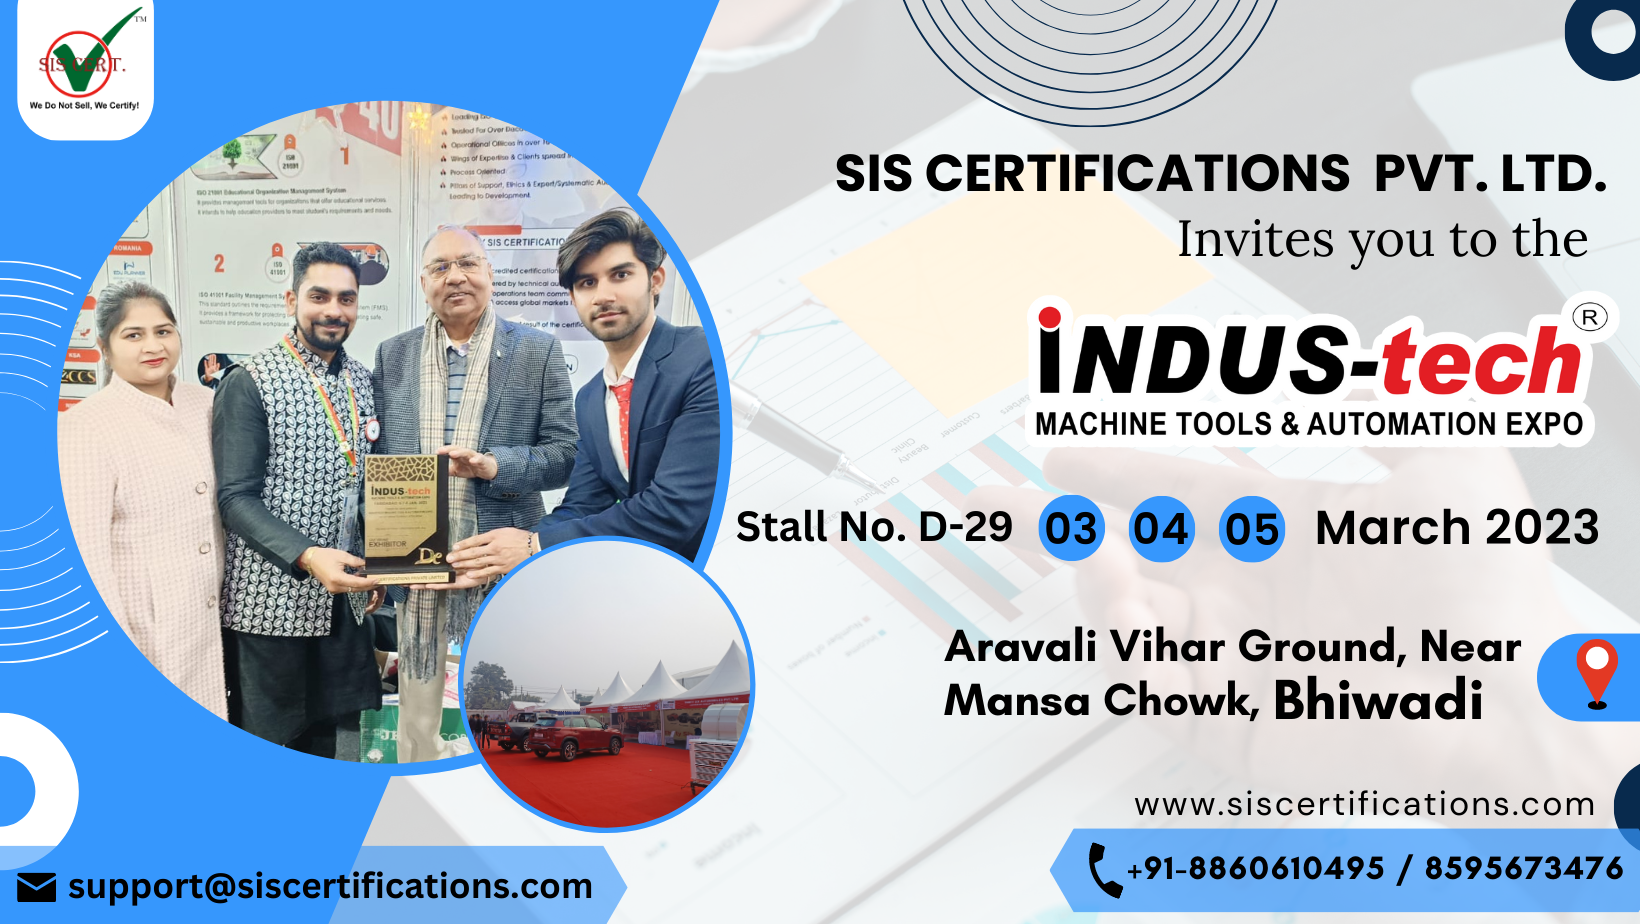 Indus tech machine tools & automation expo March 2023, Ajmer, Rajasthan, India